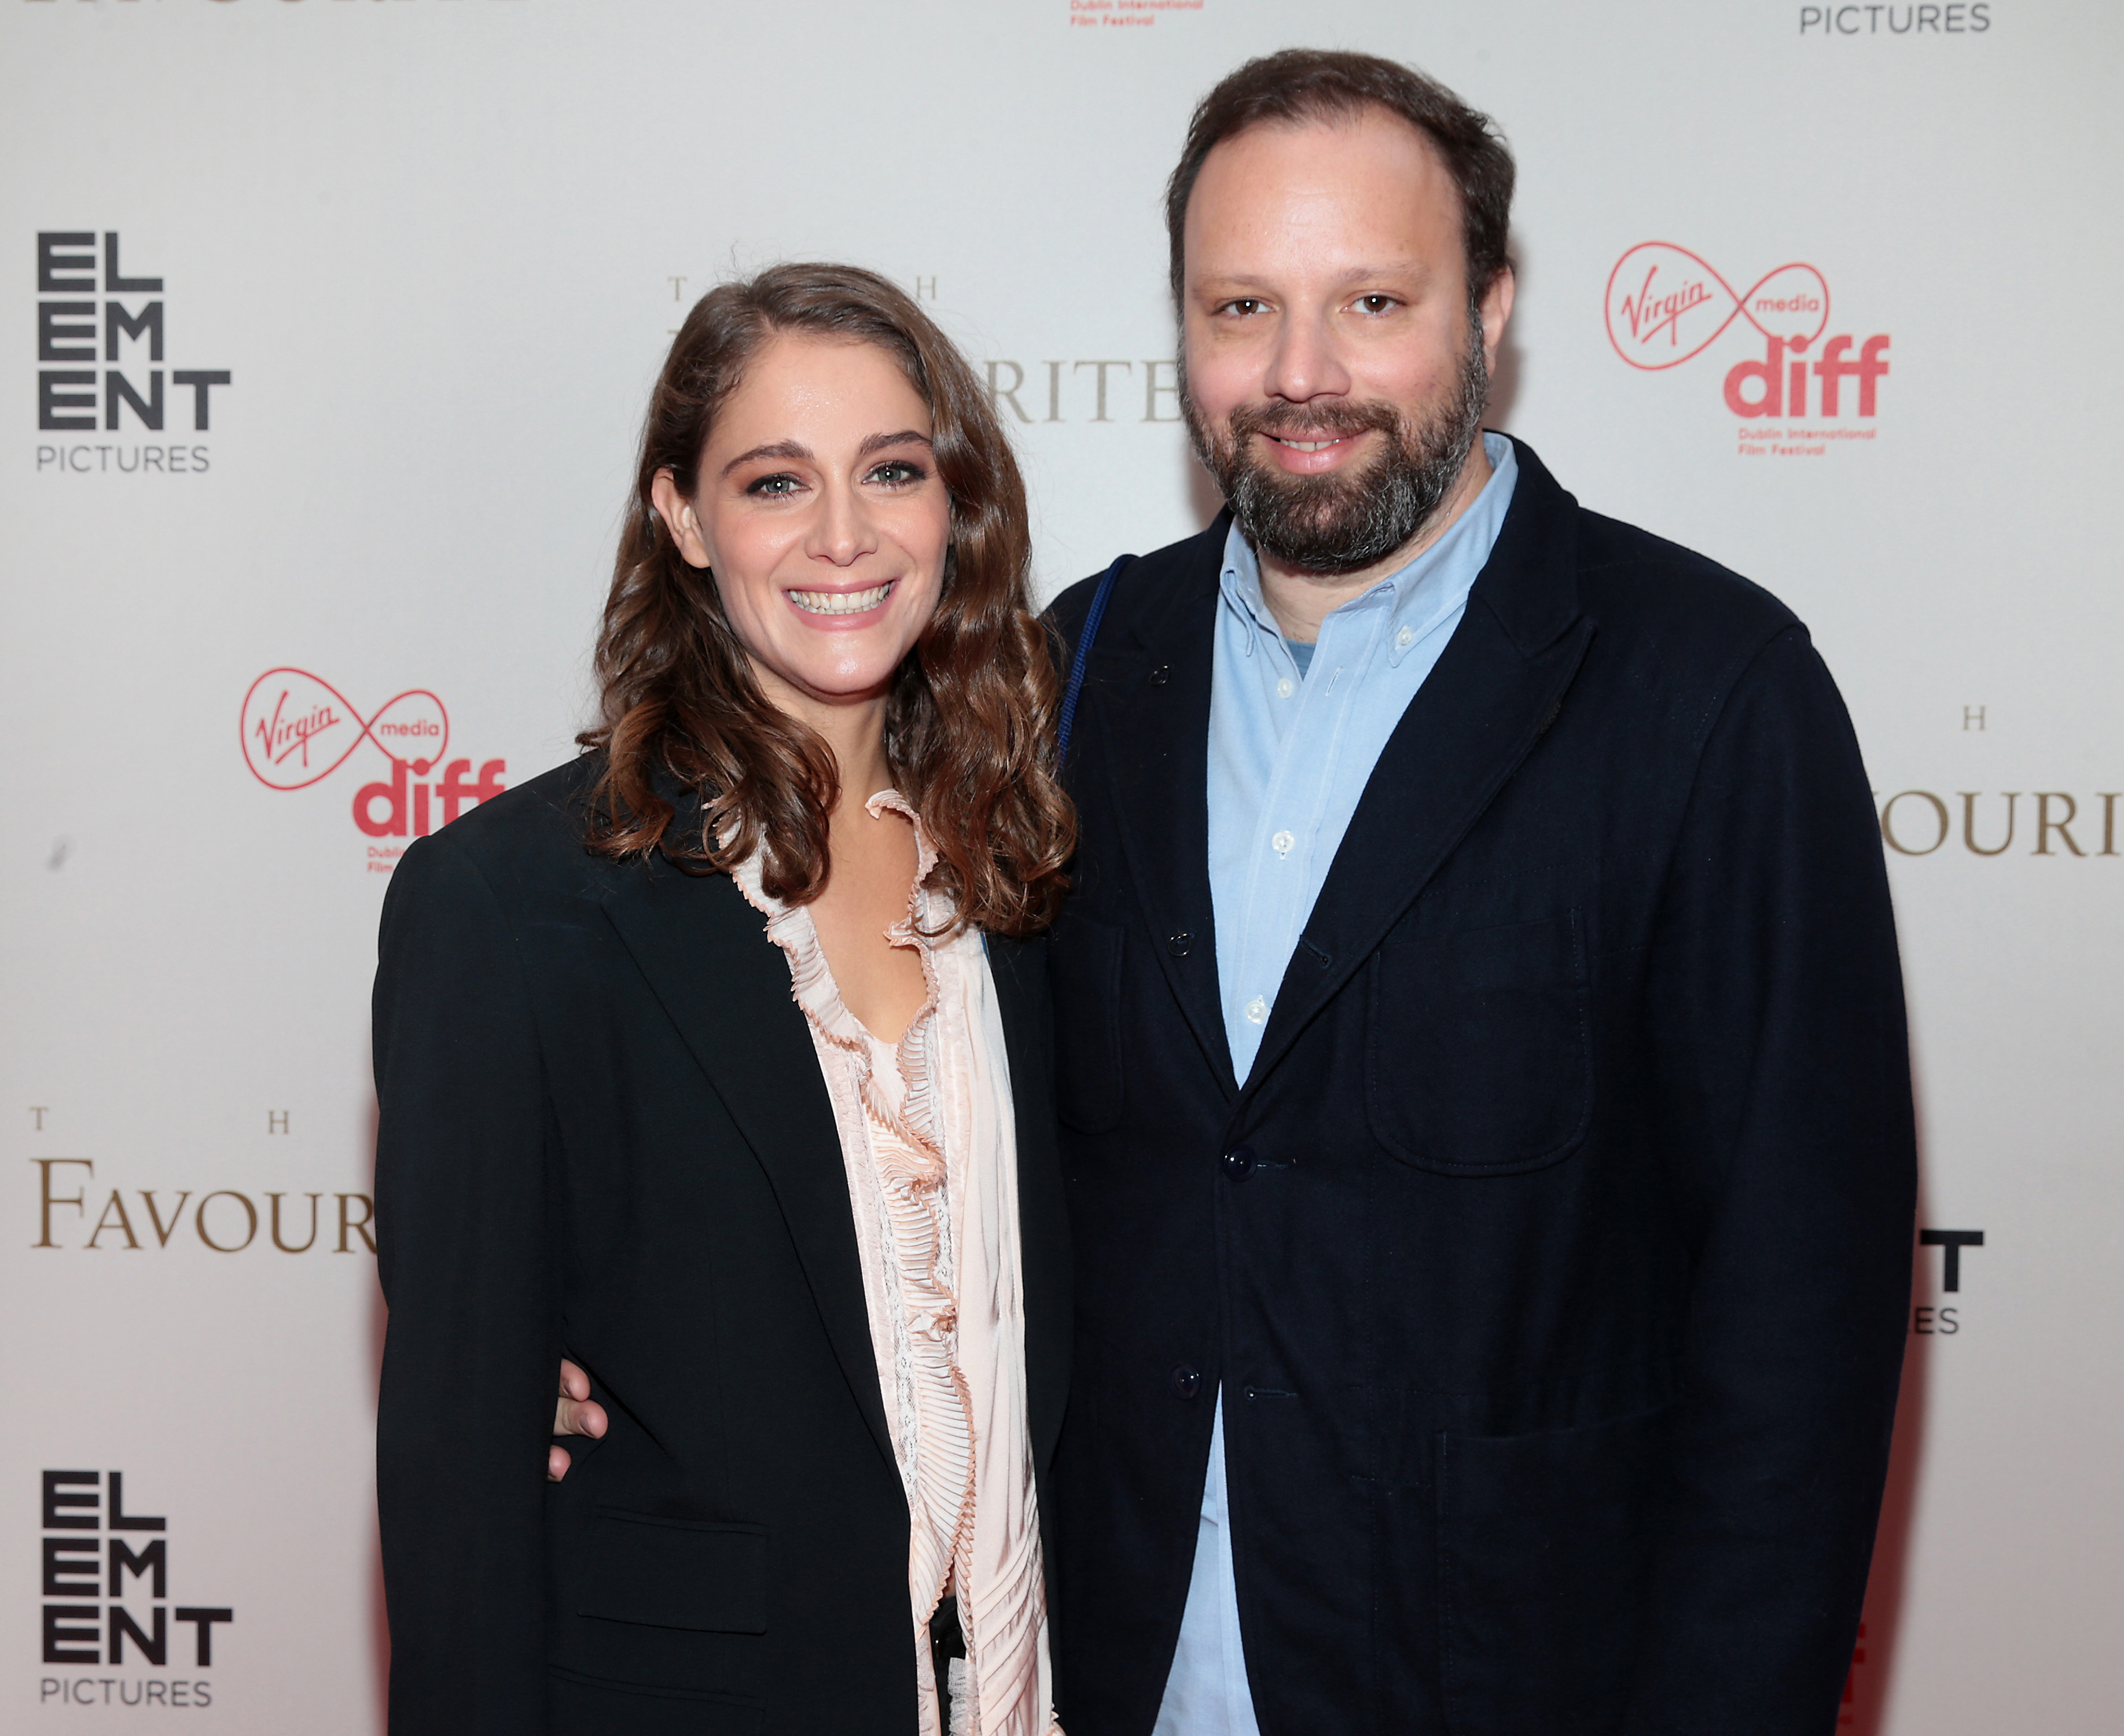 The Favourite Director Yorgos Lanthimos and his actress wife  Ariane Labed 